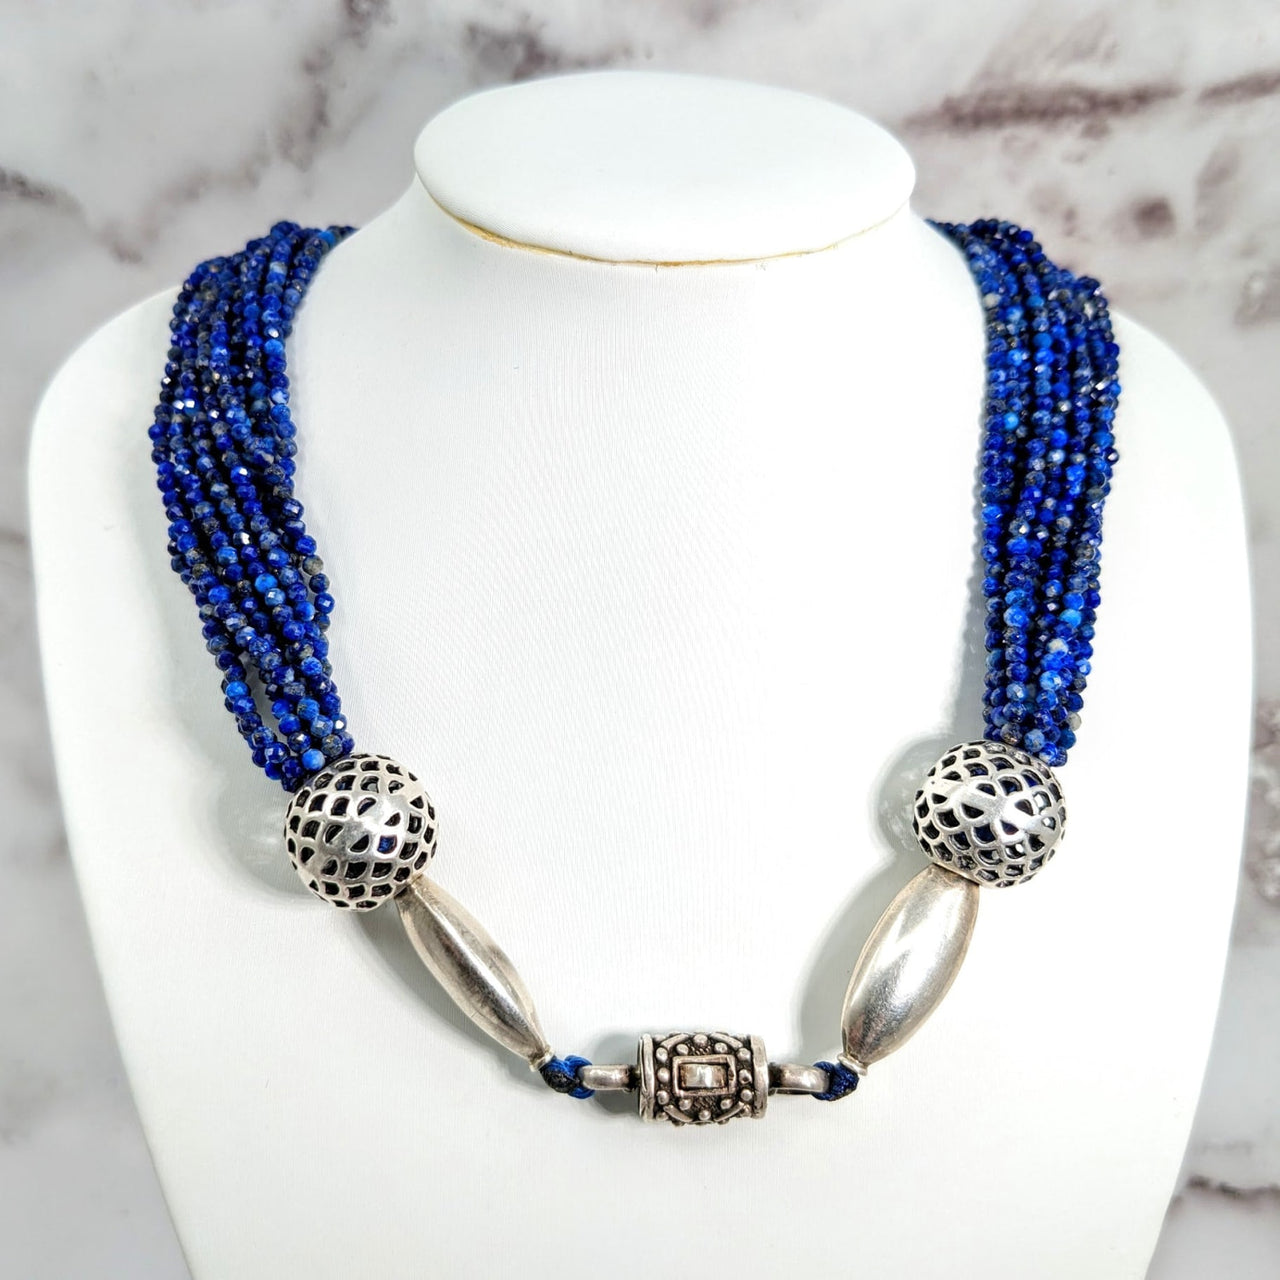 Lapis Faceted 20’ Multi-Strand Necklace #LV1711: Blue Bead, Silver Clasp Strand Necklace